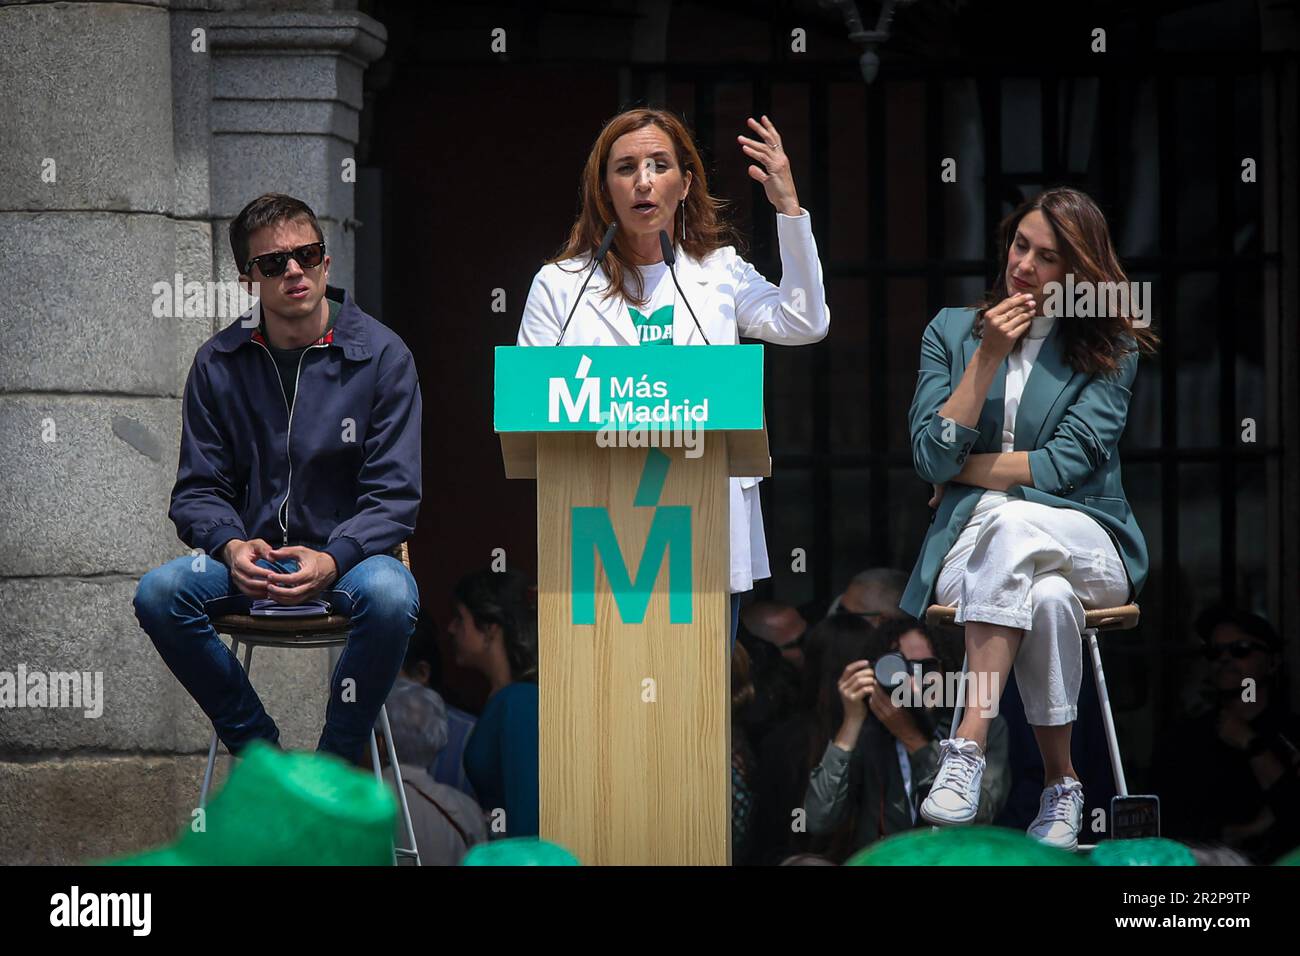 Monica Garcia (C), candidate for the presidency of the Community of Madrid in the elections to be held on May 28, addresses those present. She is accompanied by Rita Maestre, candidate for mayor of the Spanish capital for the Mas Madrid party (R) and Iñigo Errejón (L) deputy of the Cortes for the Mas Pais party. The left-wing political party, Mas Madrid, held a rally in the Plaza Mayor in Madrid. At the rally, Mónica García, candidate for president of the Madrid community, presented her political program to her supporters. Among others, they have accompanied her, Iñigo Errejón deputy of the Co Stock Photo